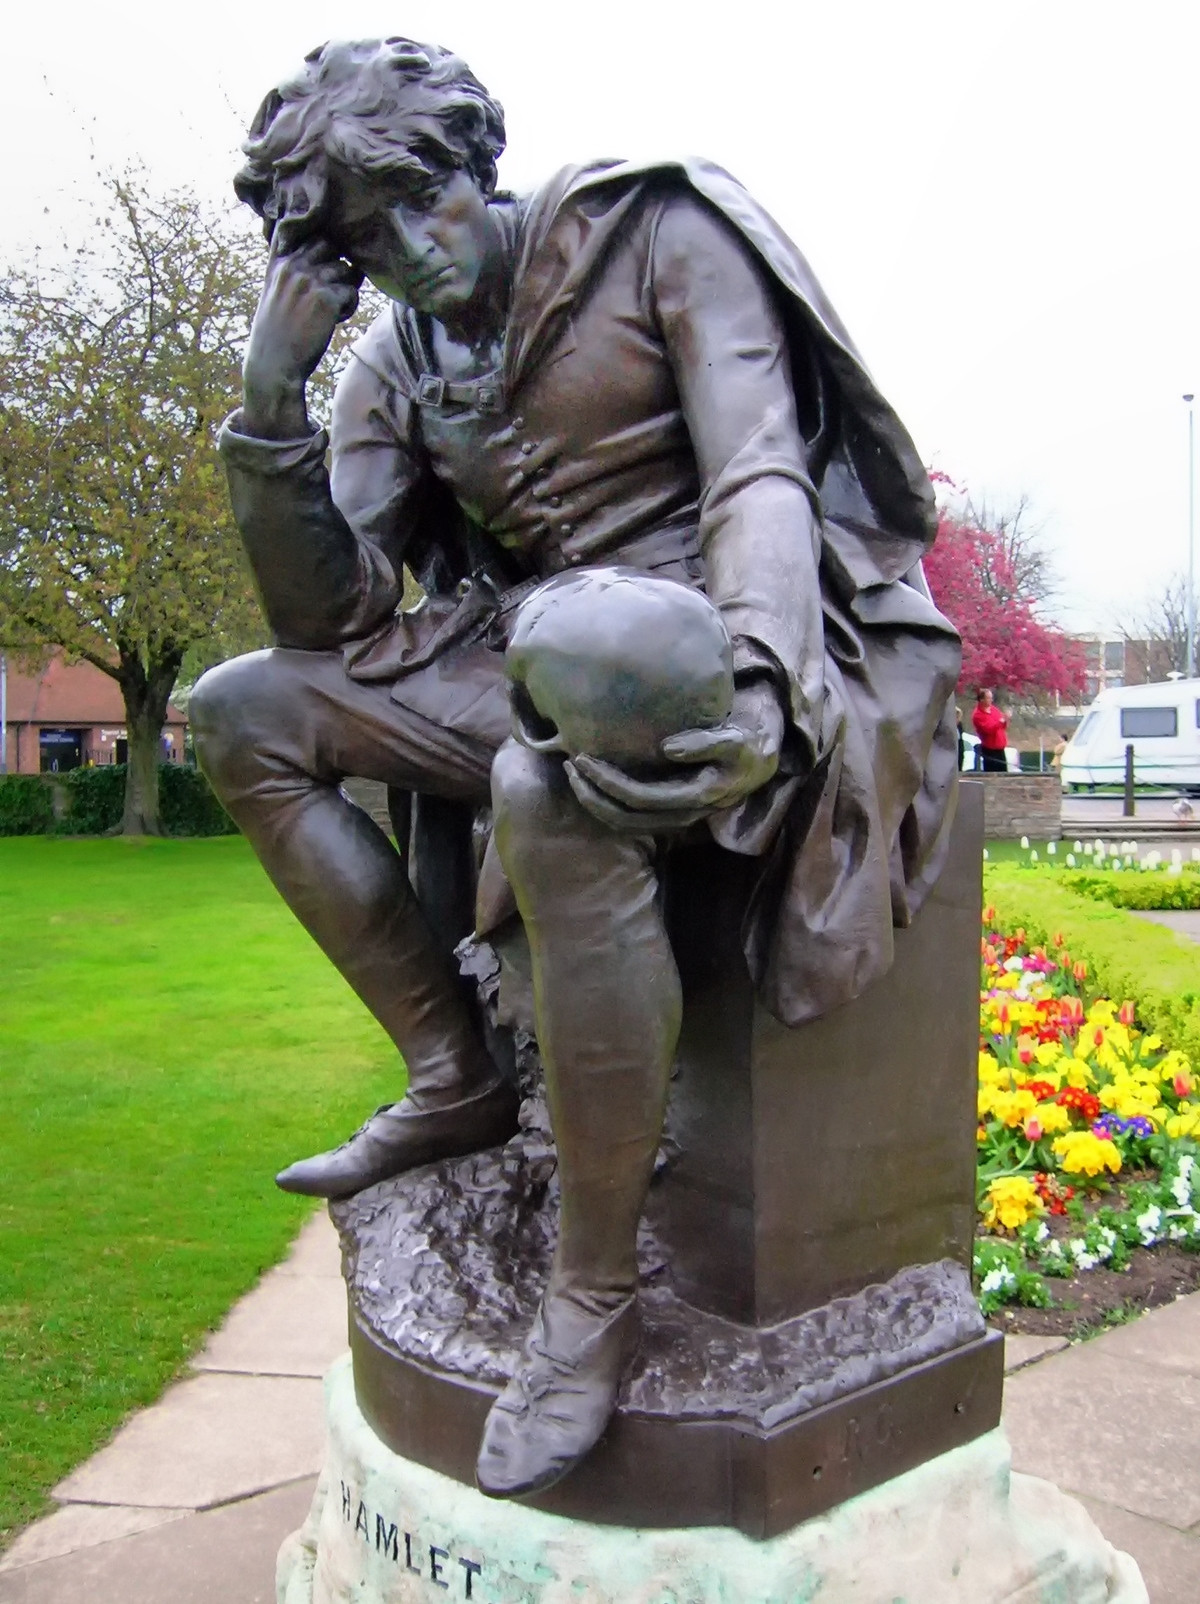 Stataue of Shakespeare's Hamlet, Stratford-upon-Avon, by Lord Ronald Gower